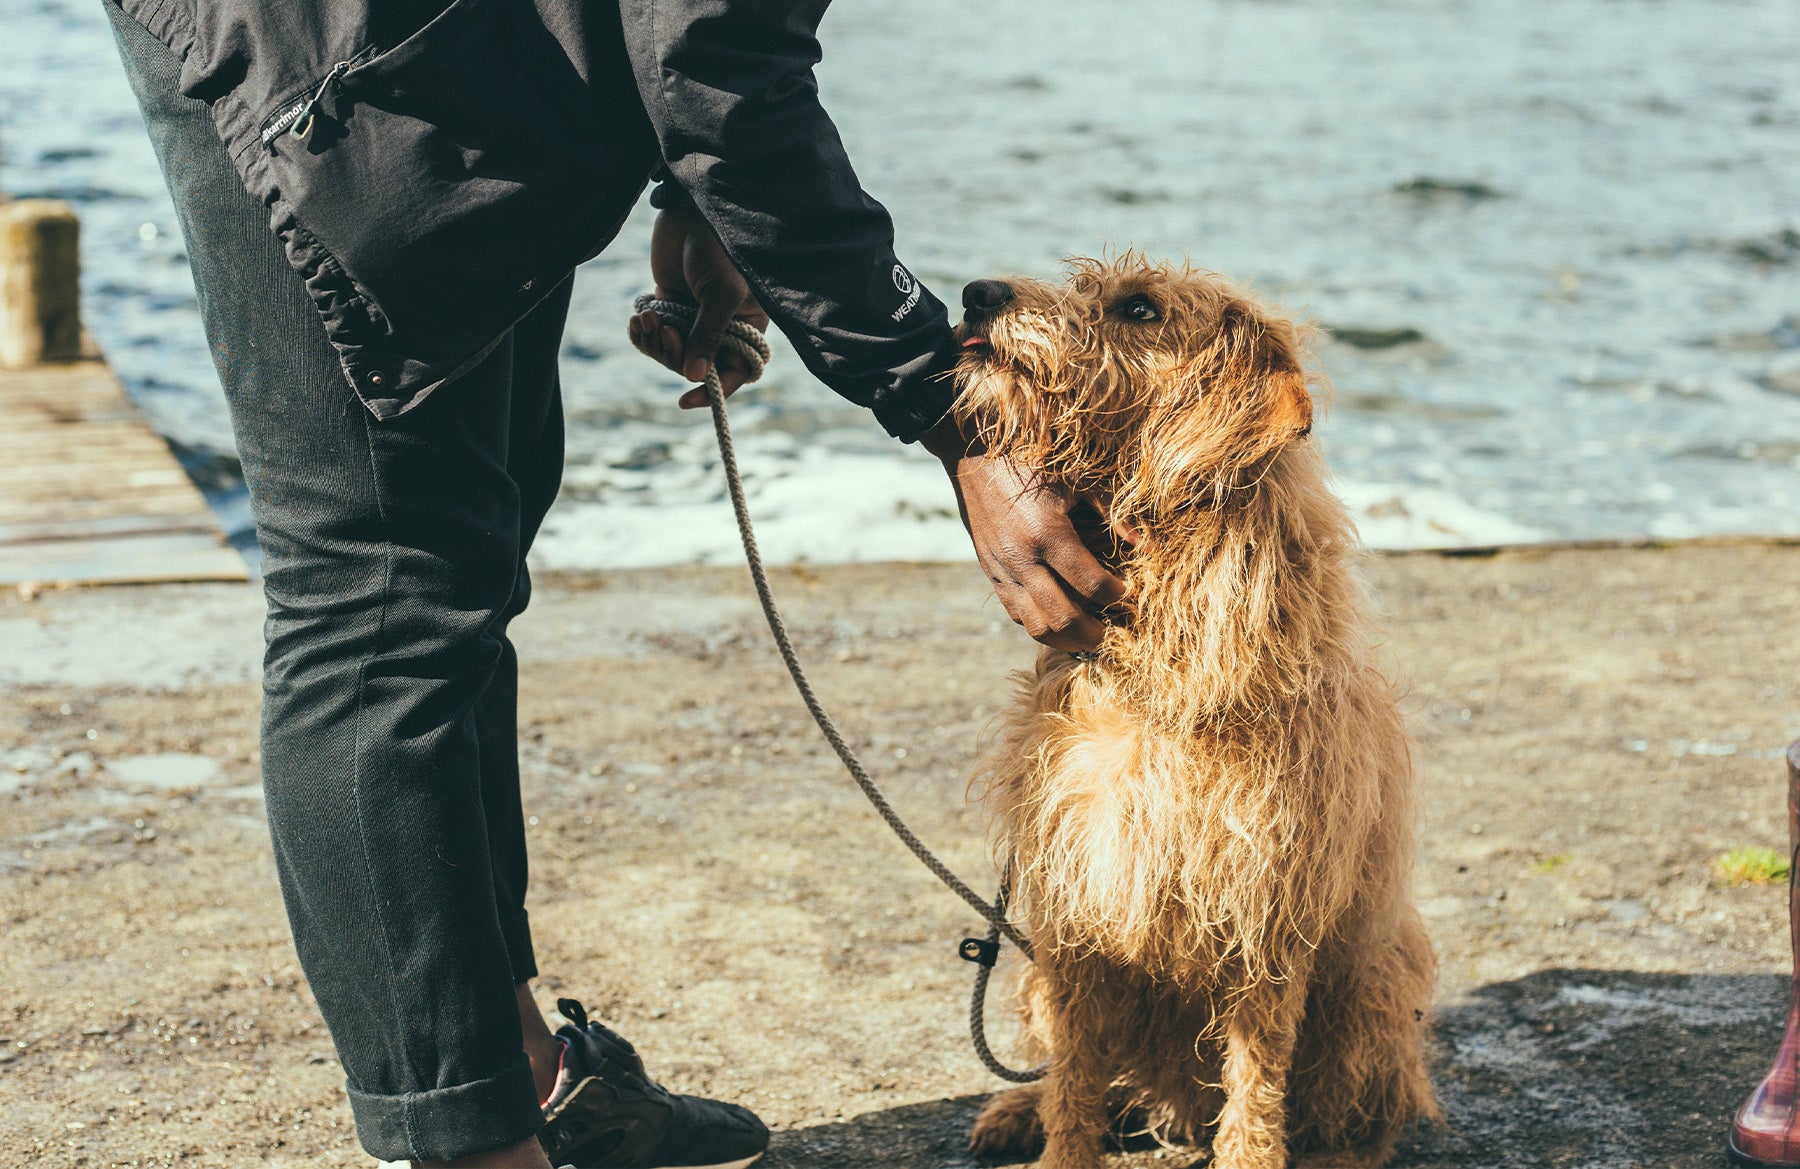 How Long Should I Wait To Take My Dog Out After Eating? – Beco